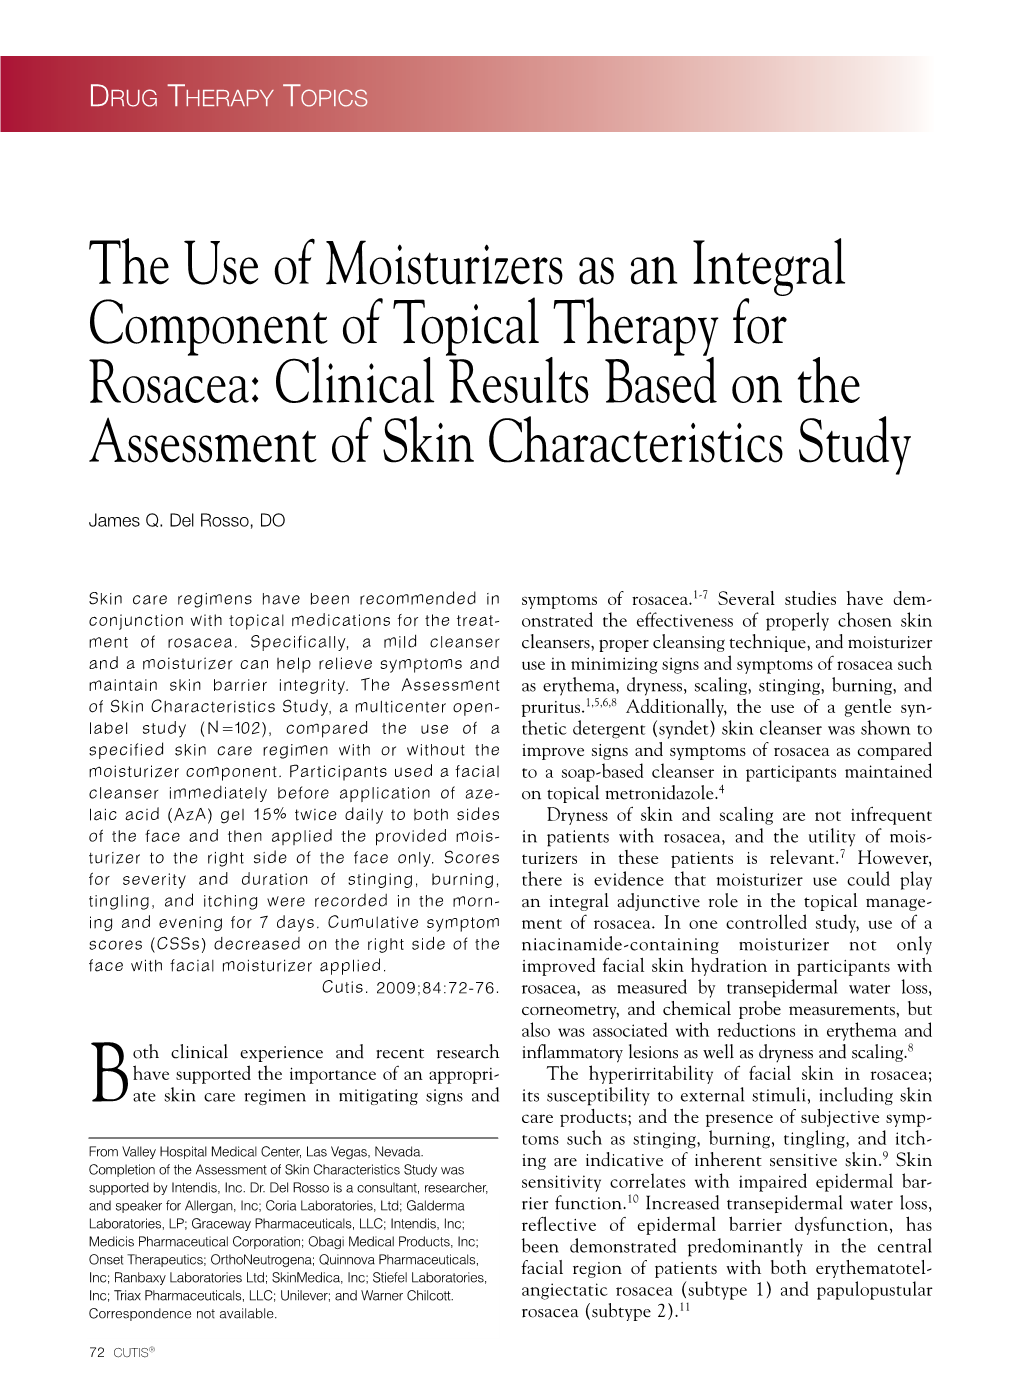 The Use of Moisturizers As an Integral Component of Topical Therapy for Rosacea: Clinical Results Based on the Assessment of Skin Characteristics Study